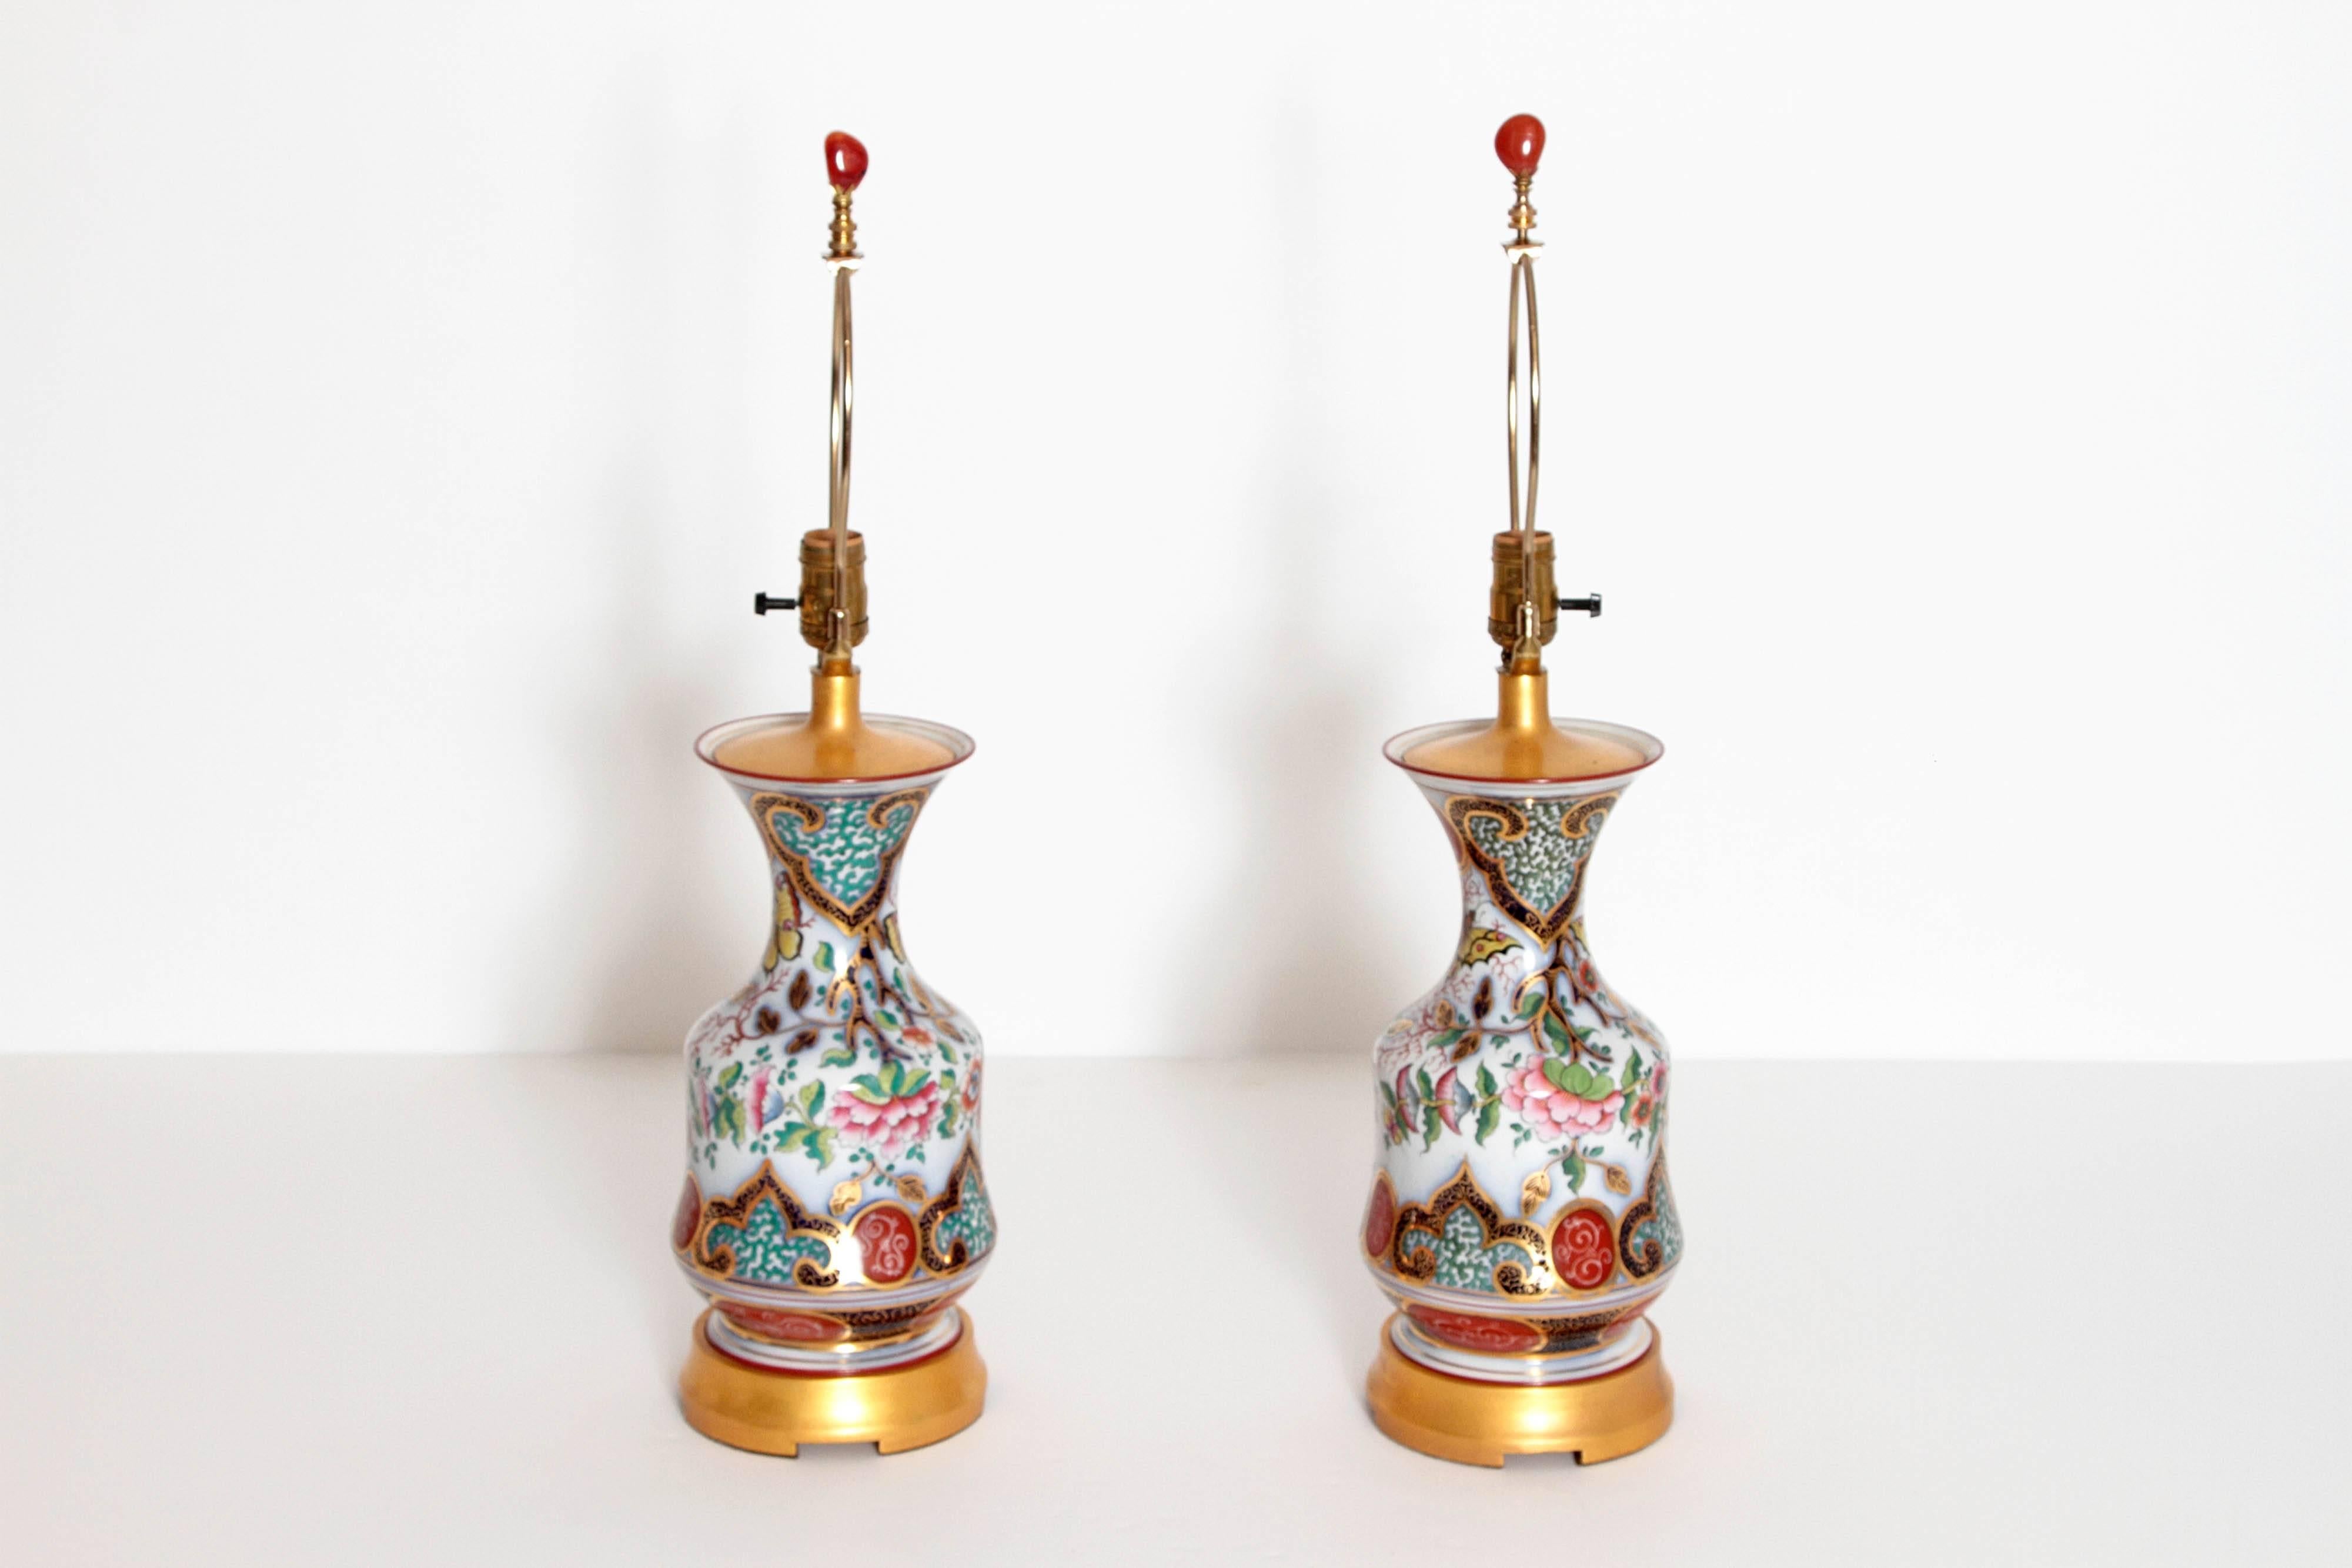 Napoleon III Pair of French Opaline Glass Hand-Painted Urns Converted into Table Lamps